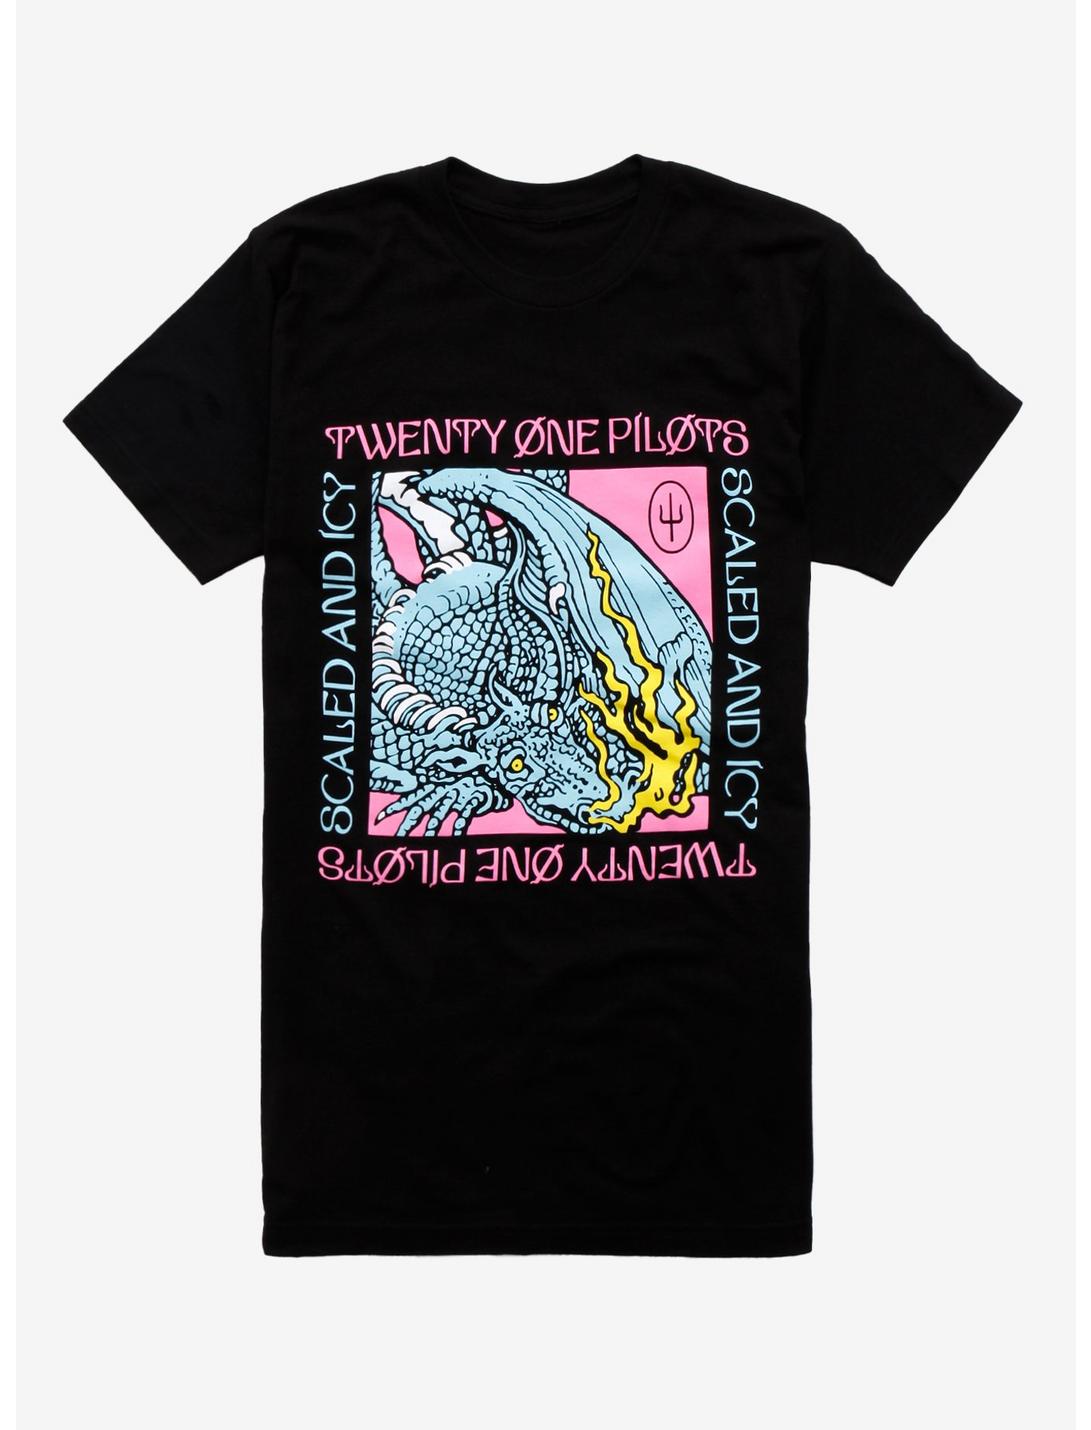 Twenty One Pilots Scaled And Icy Album Cover T-Shirt Hot Topic Exclusive, BLACK, hi-res